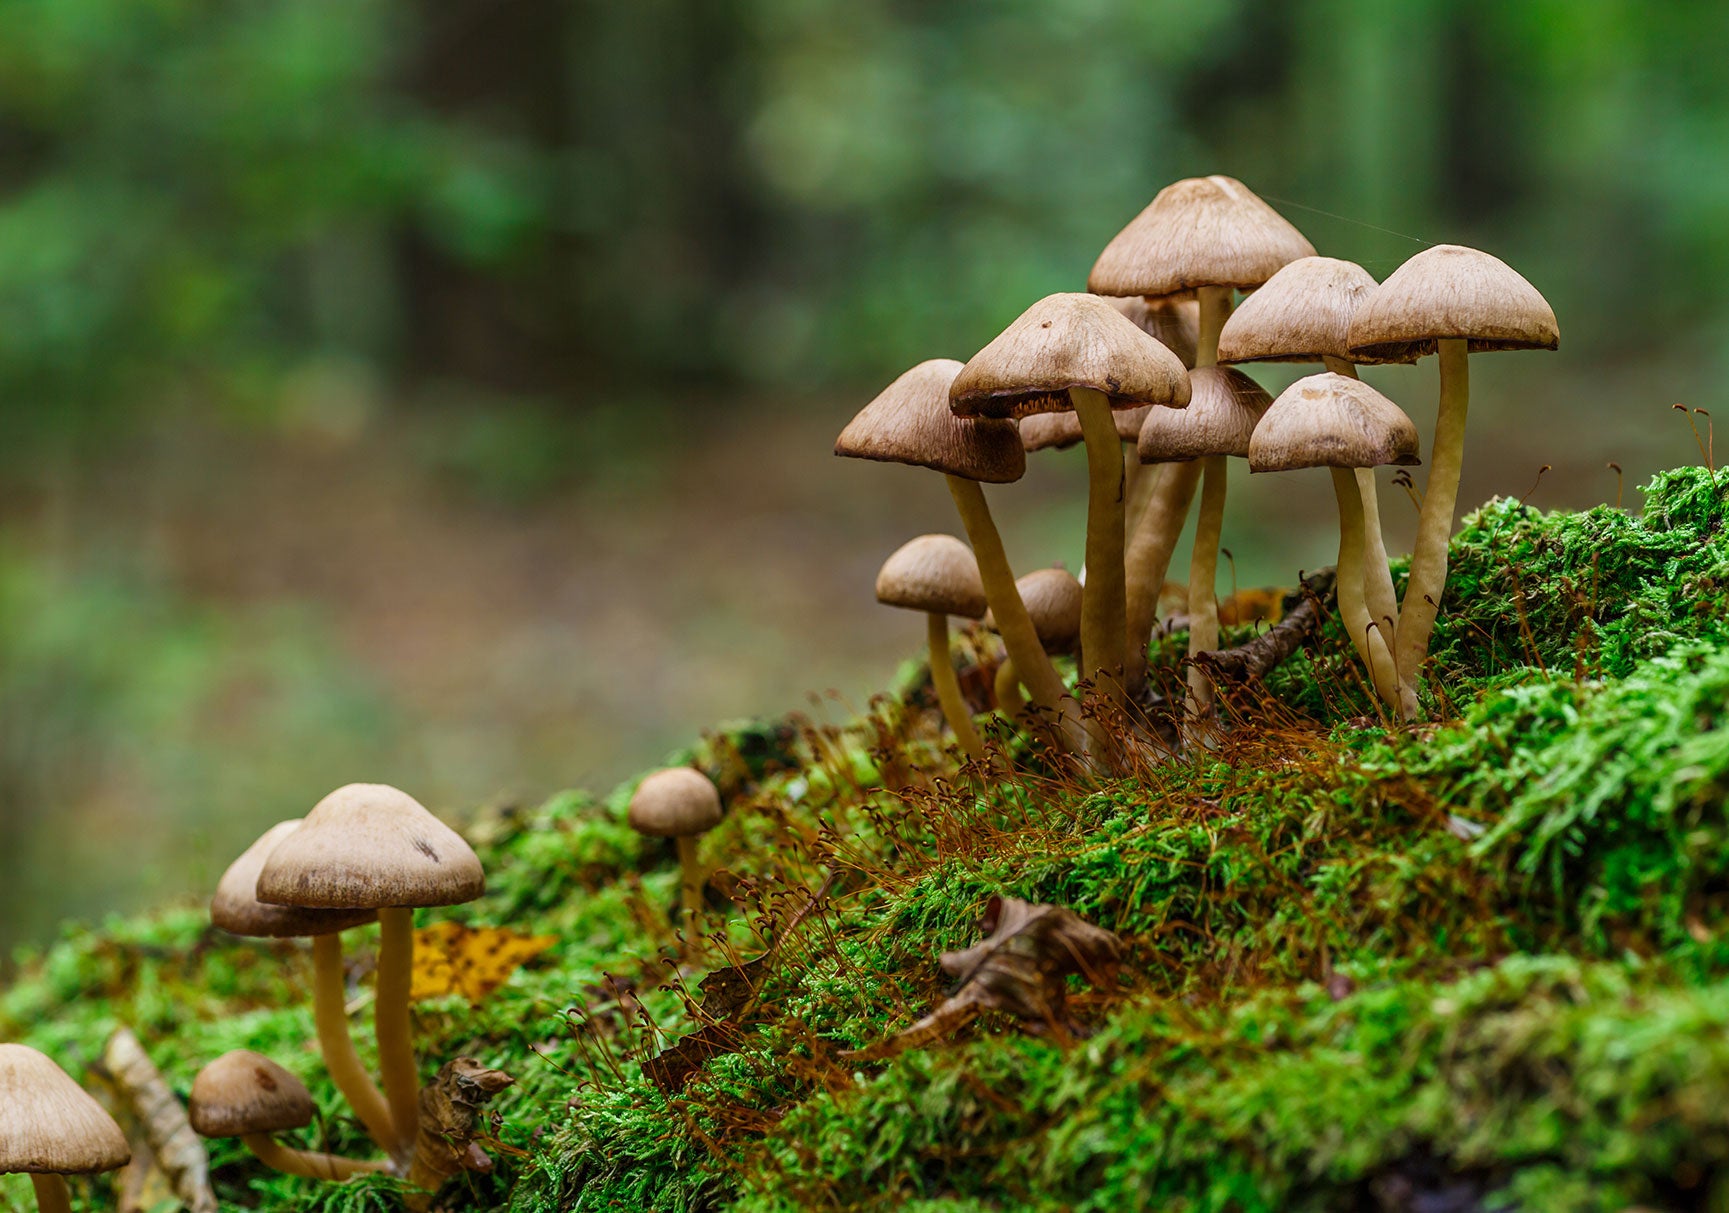 Functional mushrooms have both mycellium and fruiting bodies